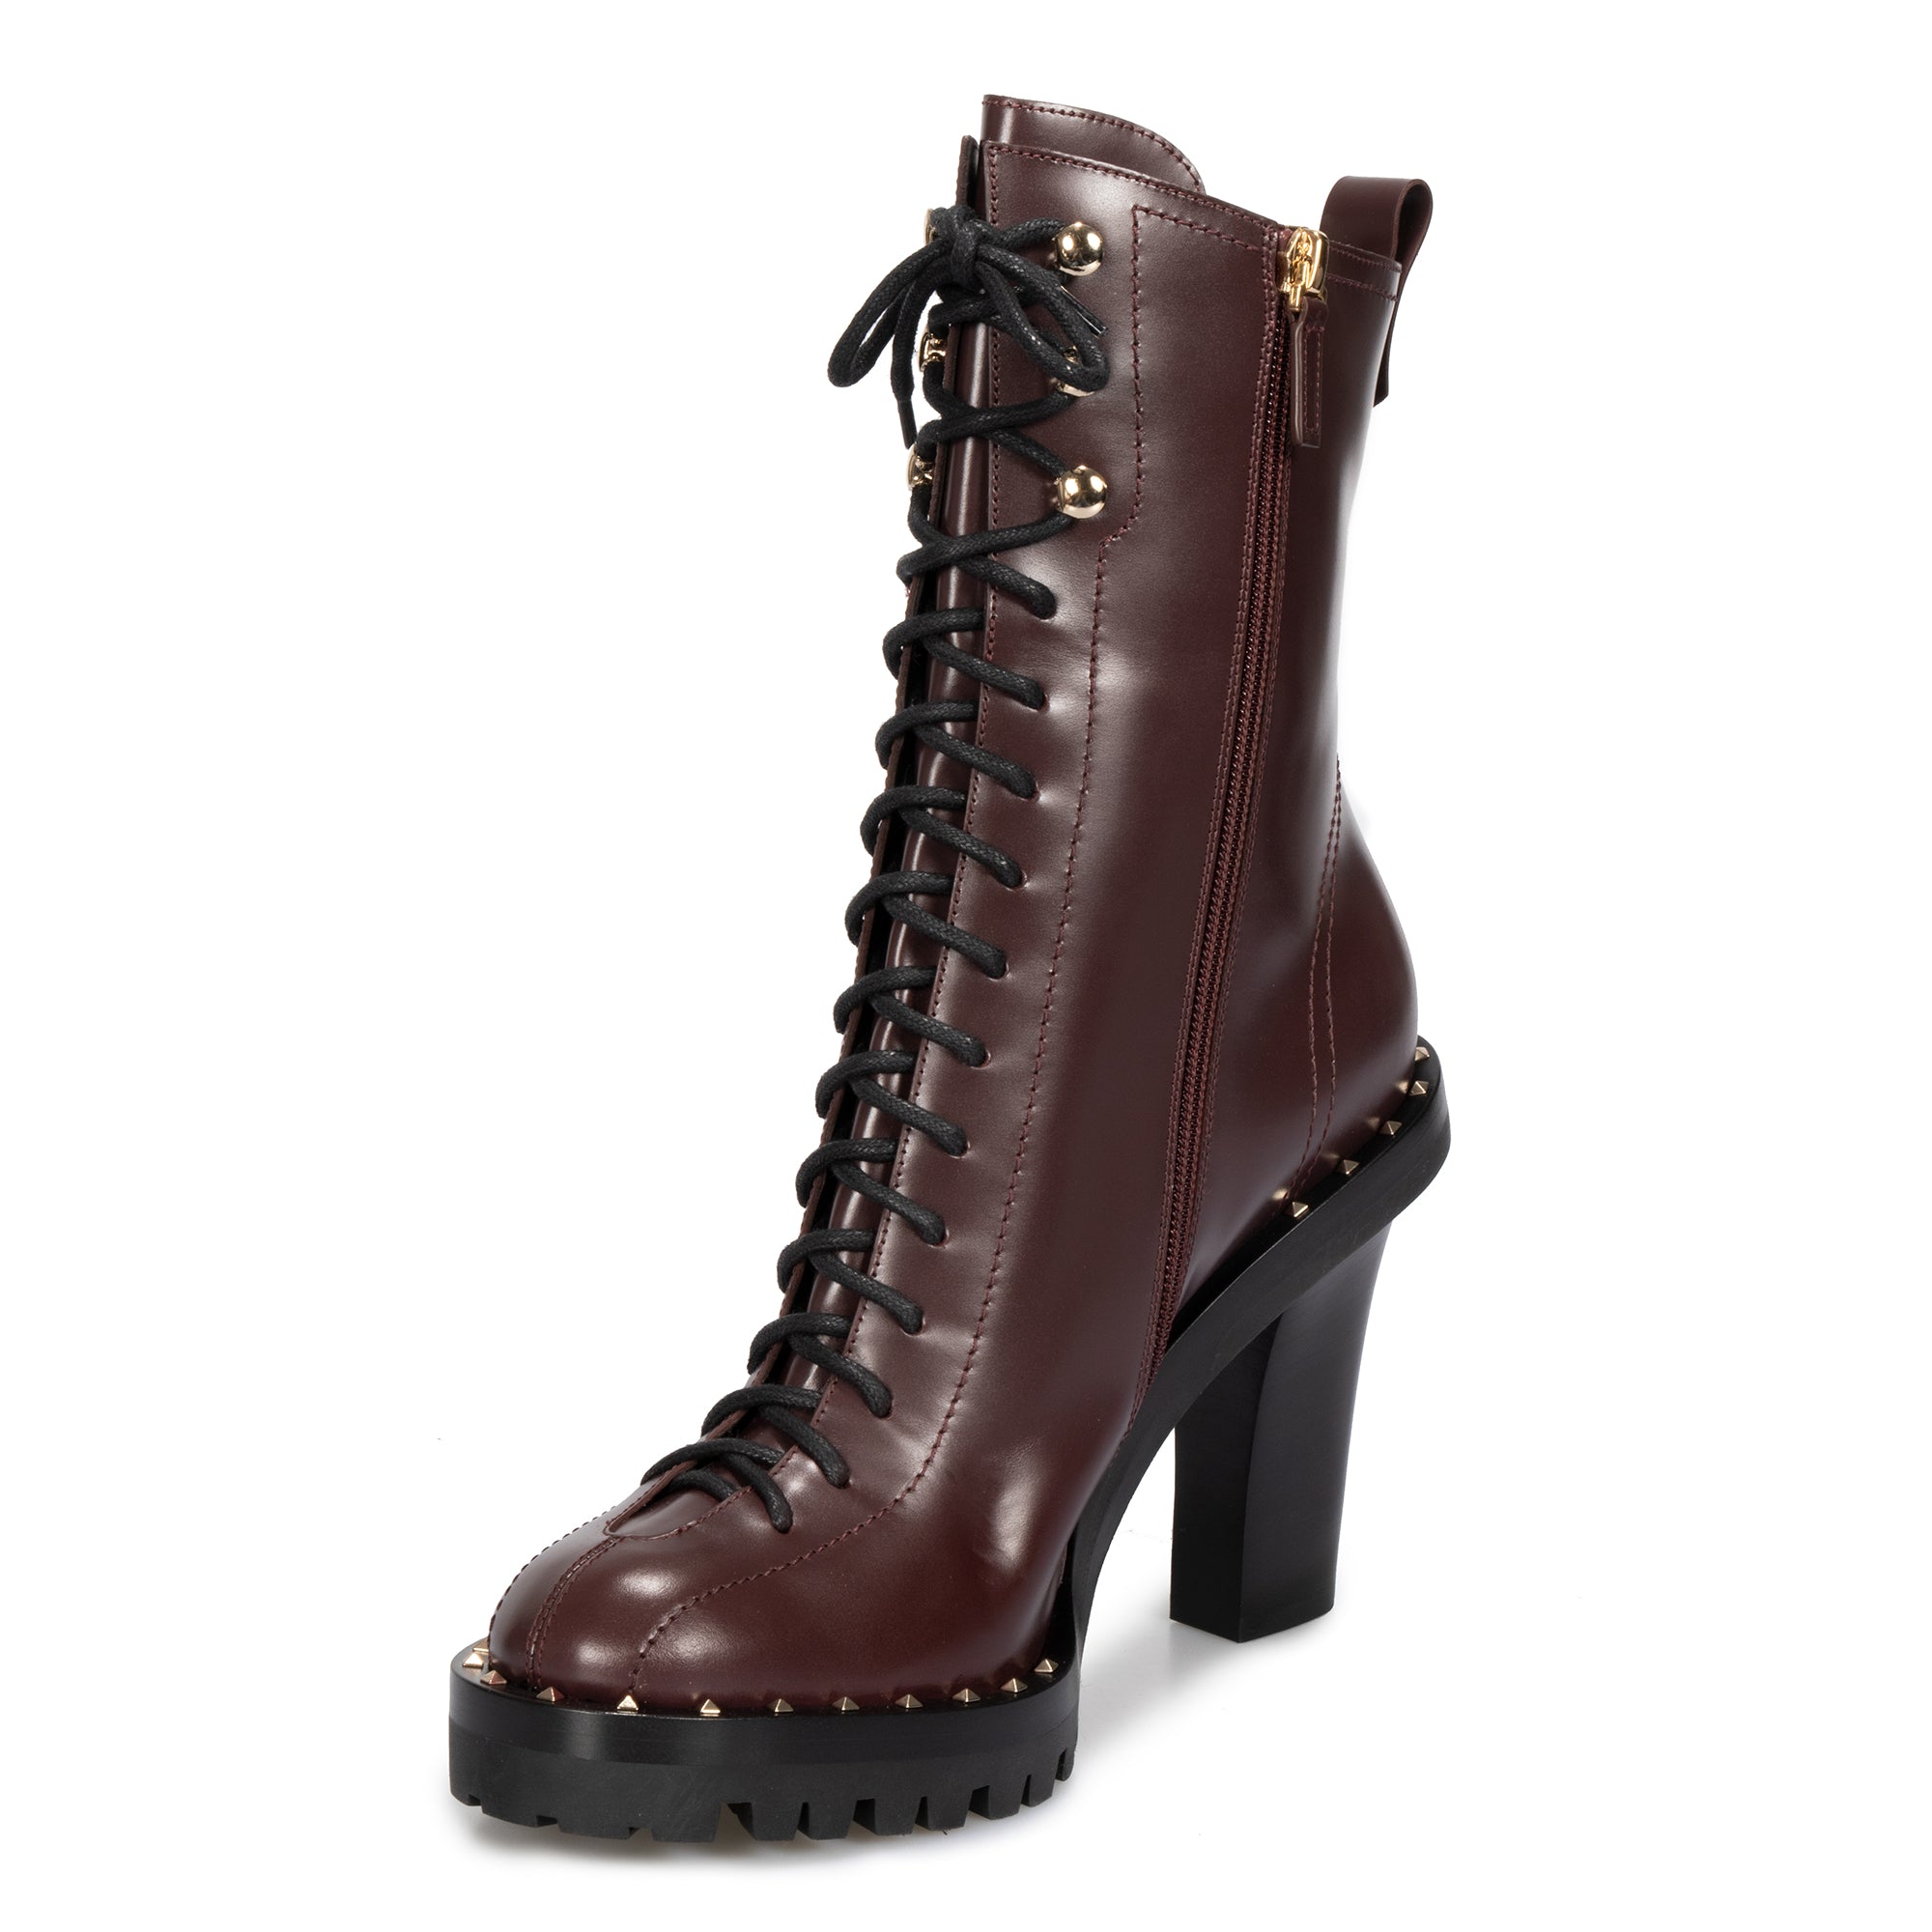 Valentino Soul Rockstud Boots in Burgundy